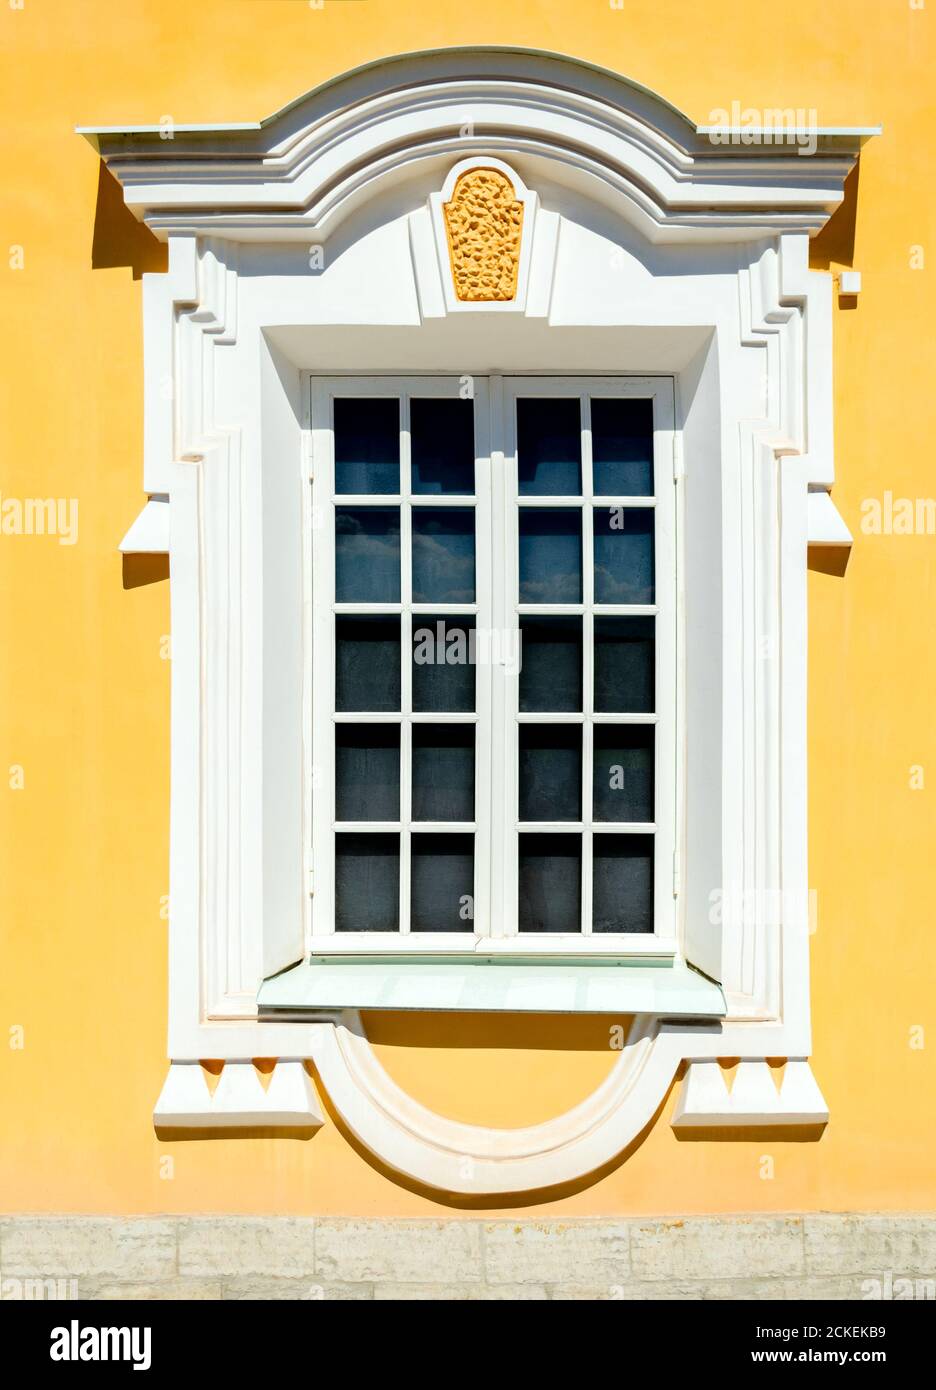 Old window decoration in details Stock Photo